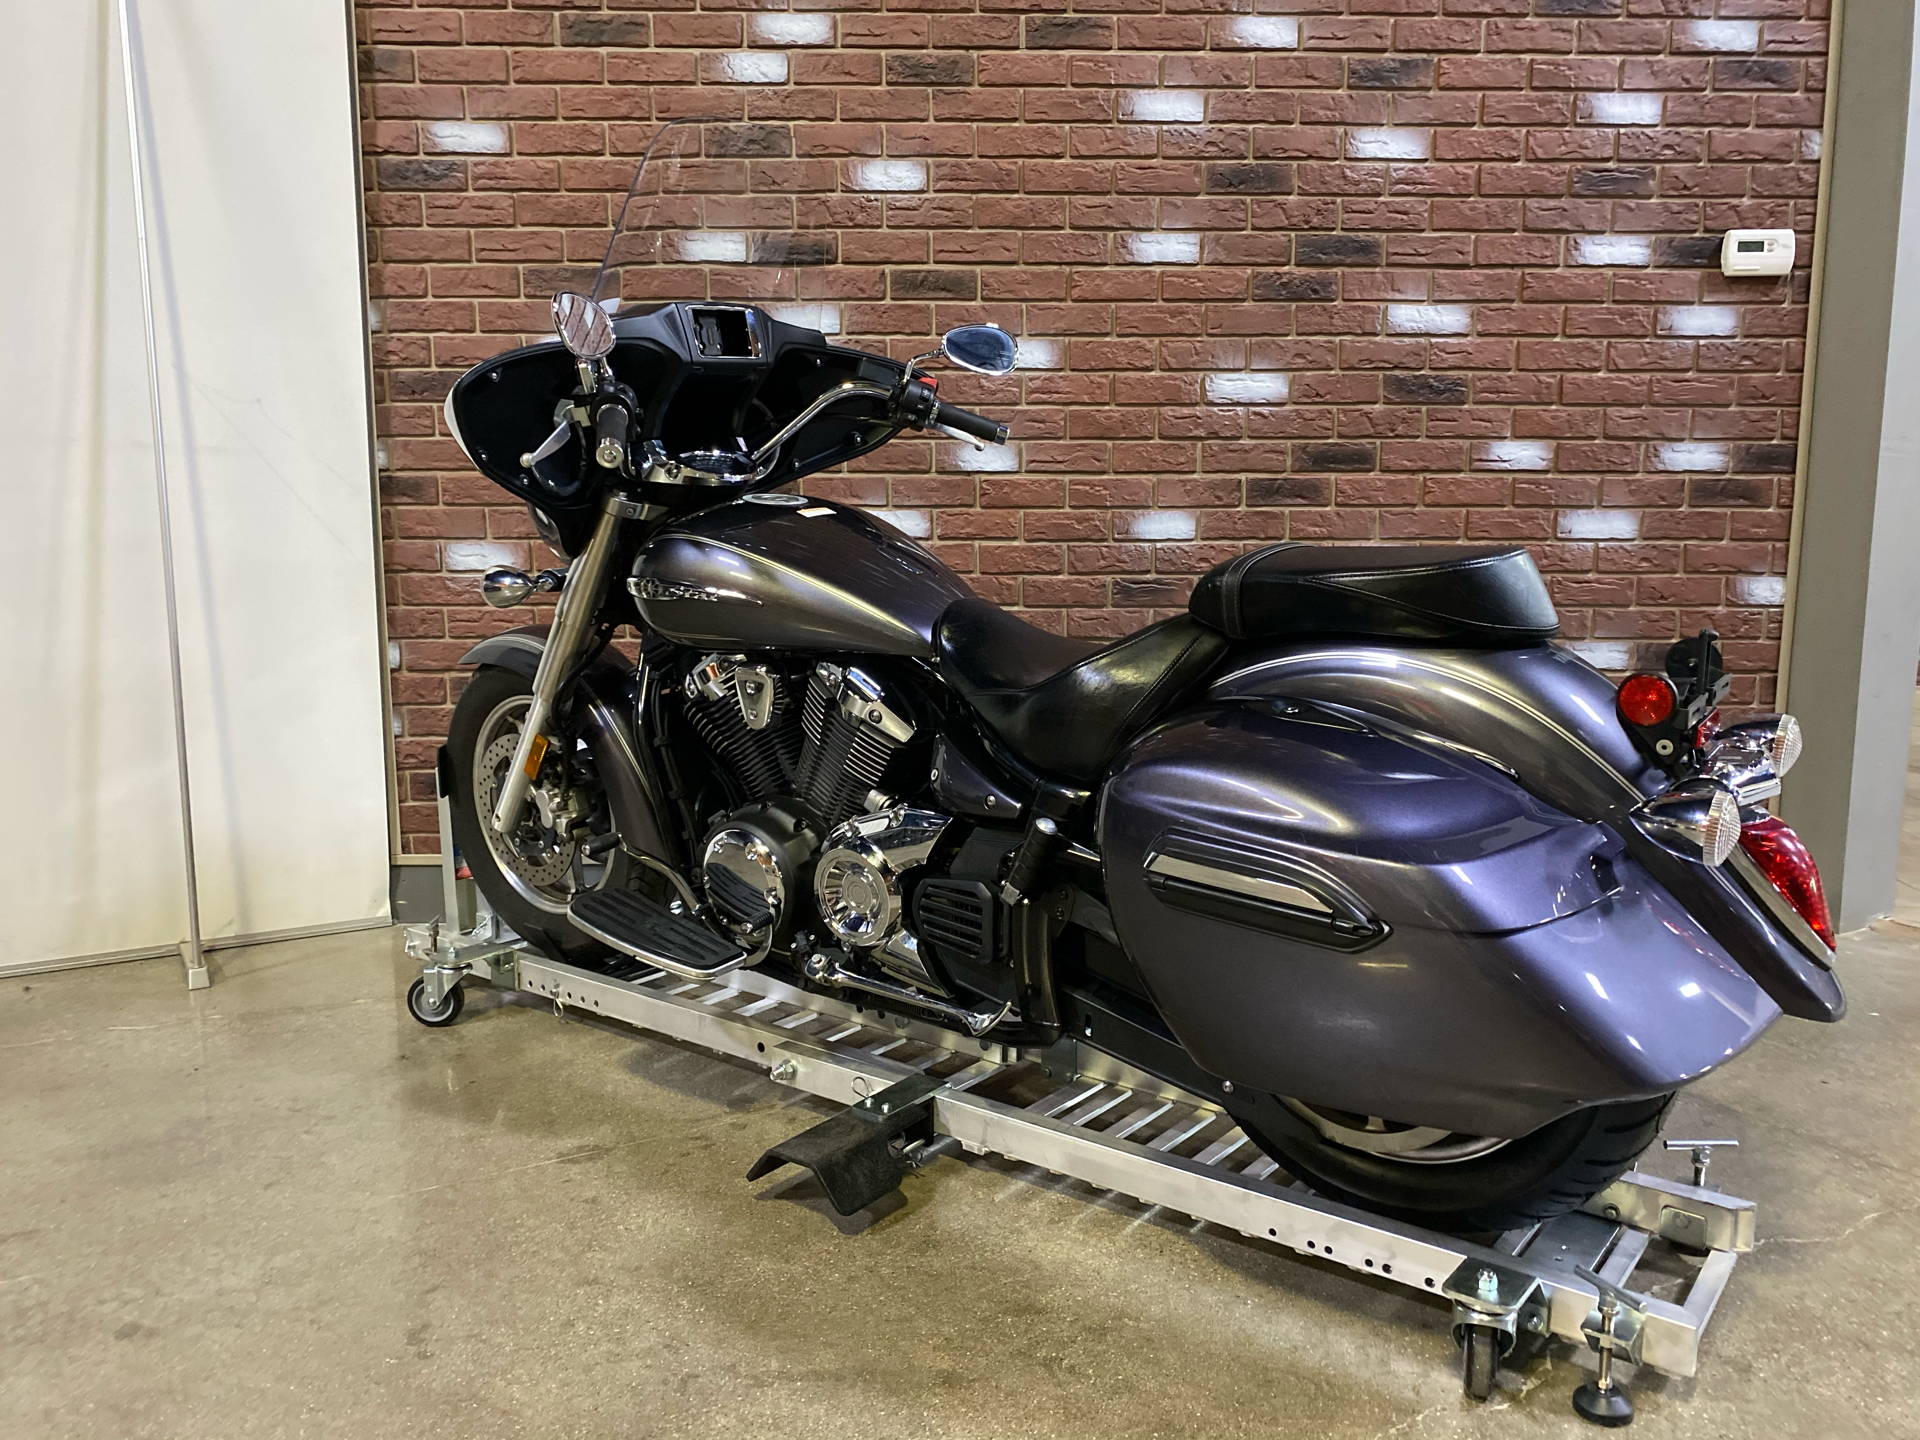 2014 Yamaha V Star 1300 Deluxe in Dimondale, Michigan - Photo 6